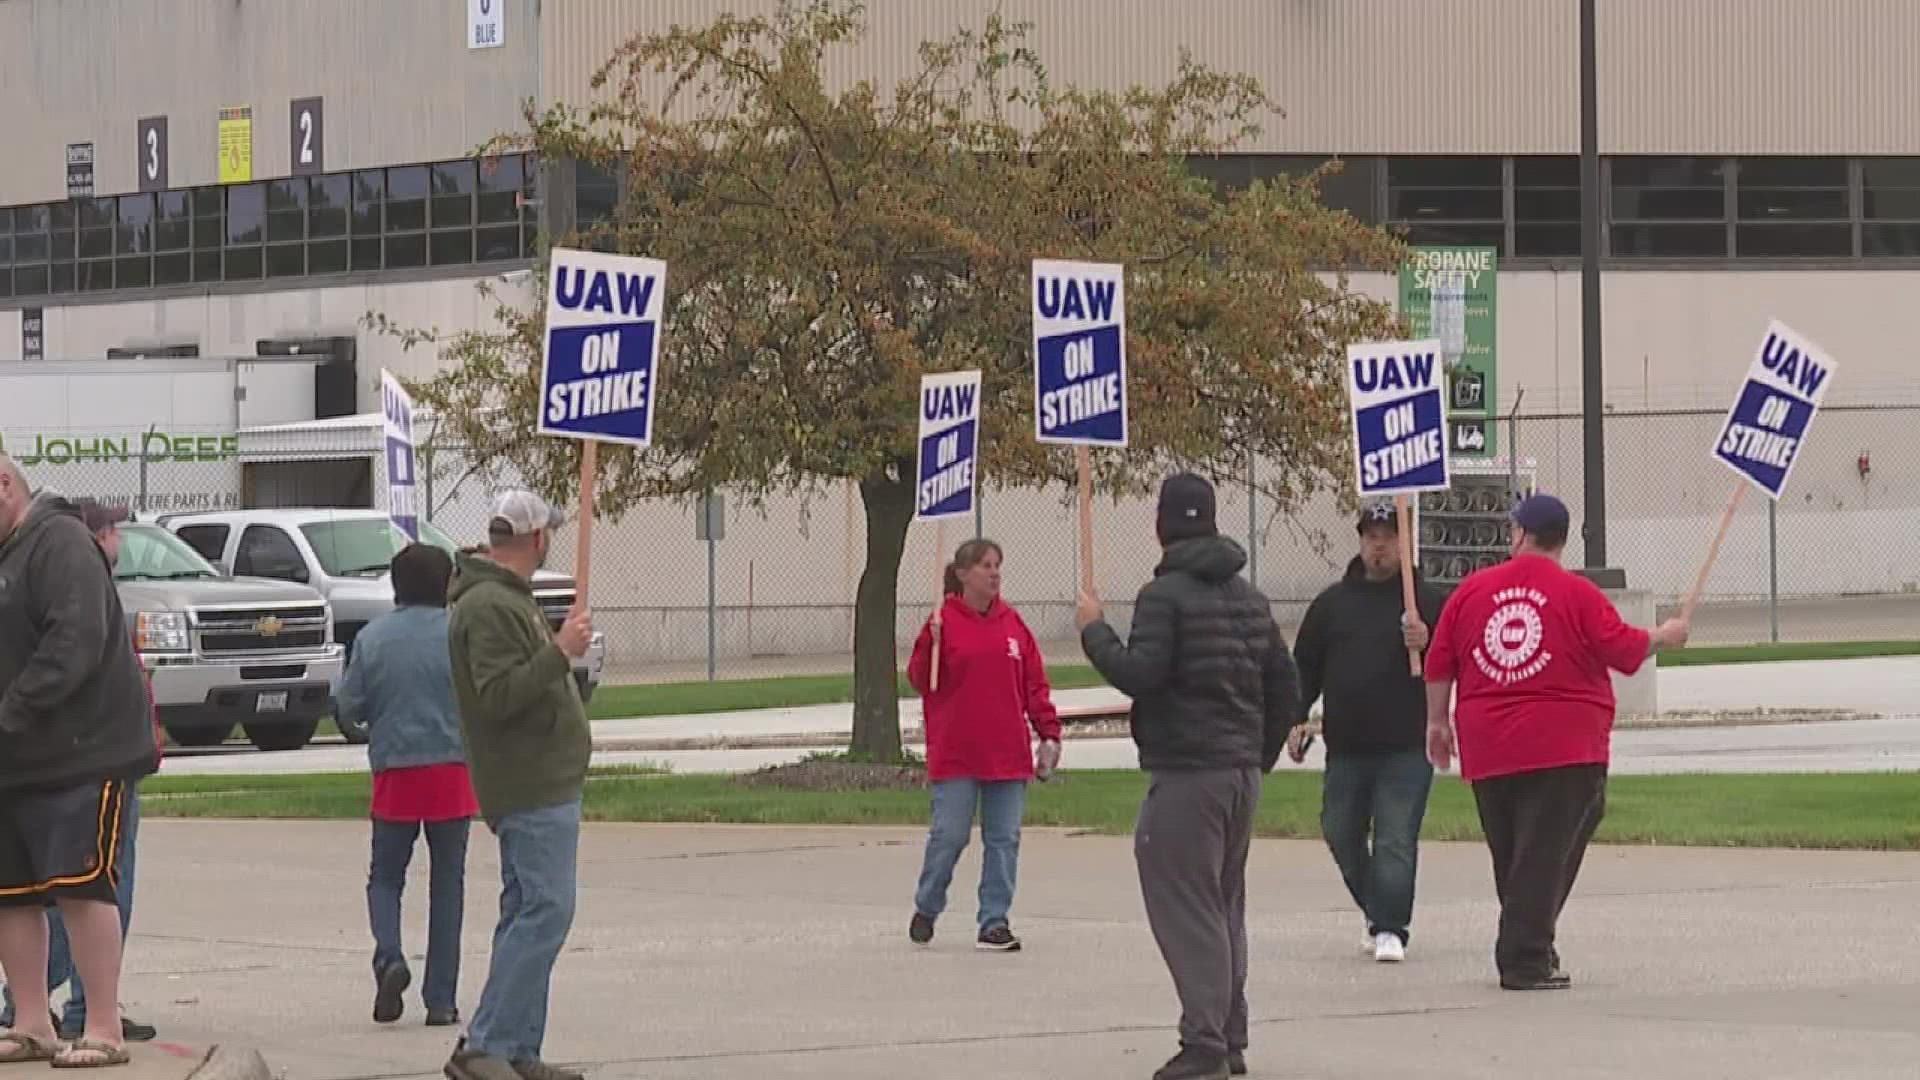 There are rules to follow while on the picket lines if union members want to receive their strike pay.